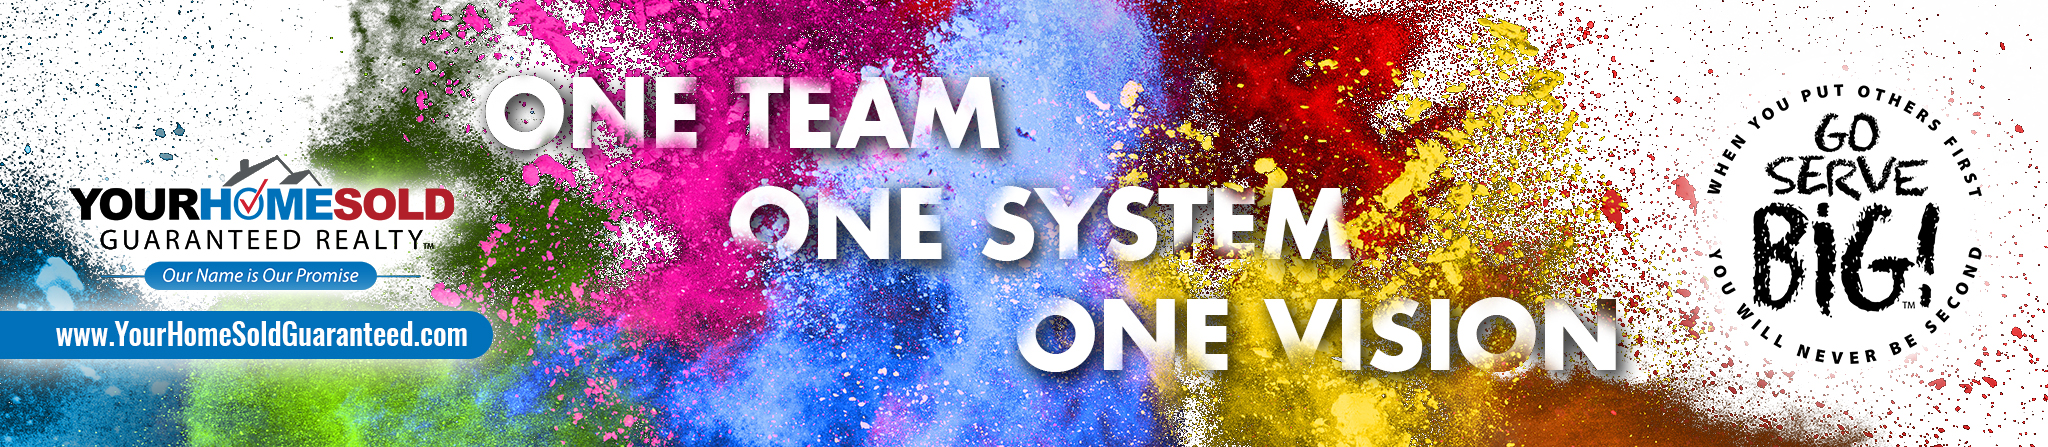 YOUR-HOME-SOLD-GUARANTEED-REALTY-2022-New-Year-Theme-ONE-TEAM-ONE-SYSTEM-ONE-VISION.jpg